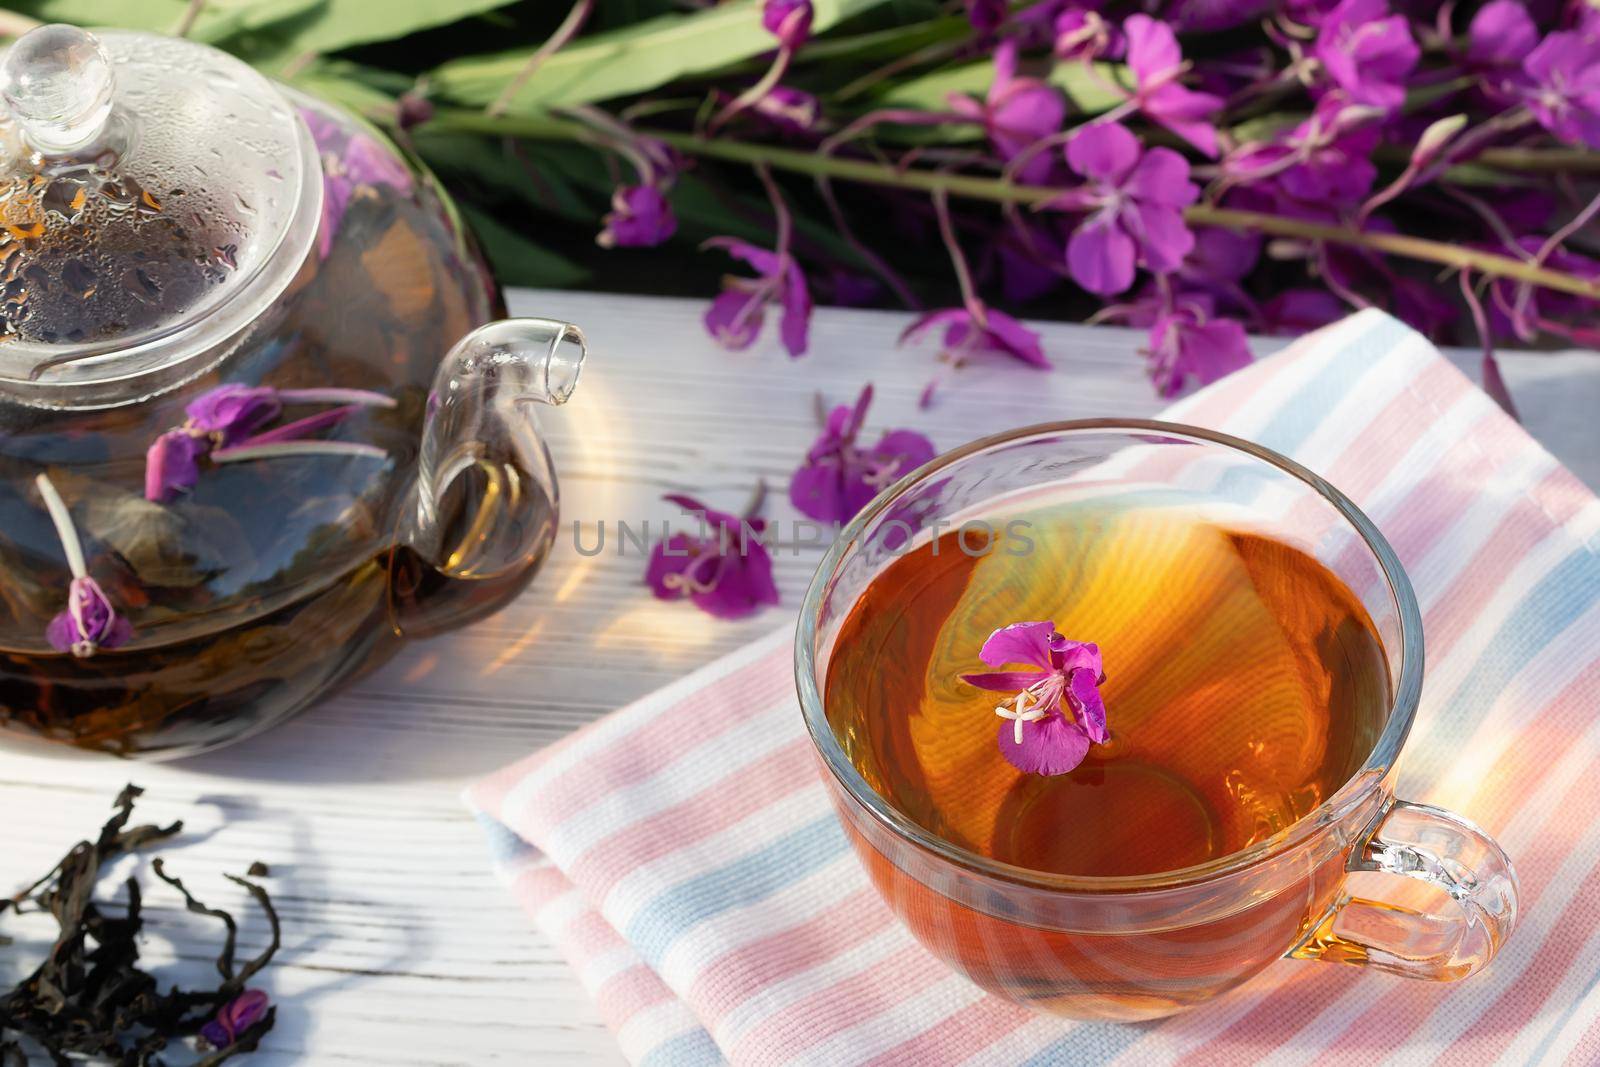 Herbal tea made from fireweed known as blooming sally in teapot and cup by galsand